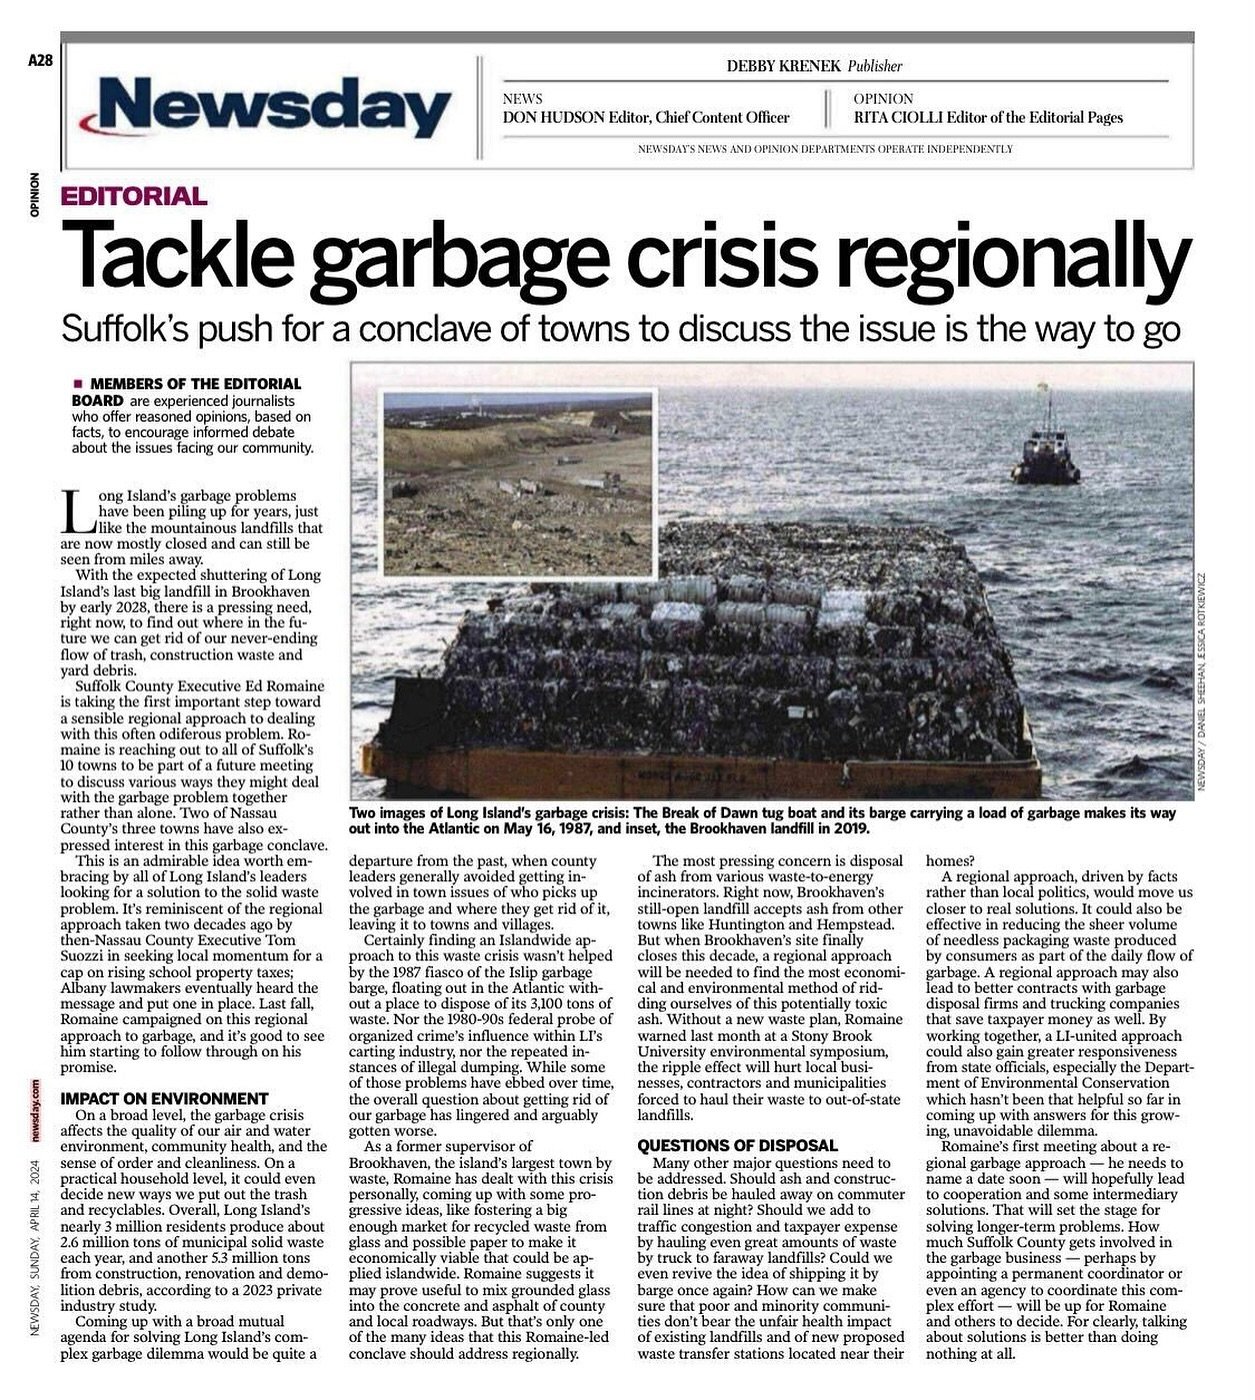 Tis the season for the annual Newsday editorial supporting the common sense approach of regional approach to trash. Indisputable! However, for the town of Brookhaven to continue profiting off of a leaky, toxic, unjust landfill while blustering about 